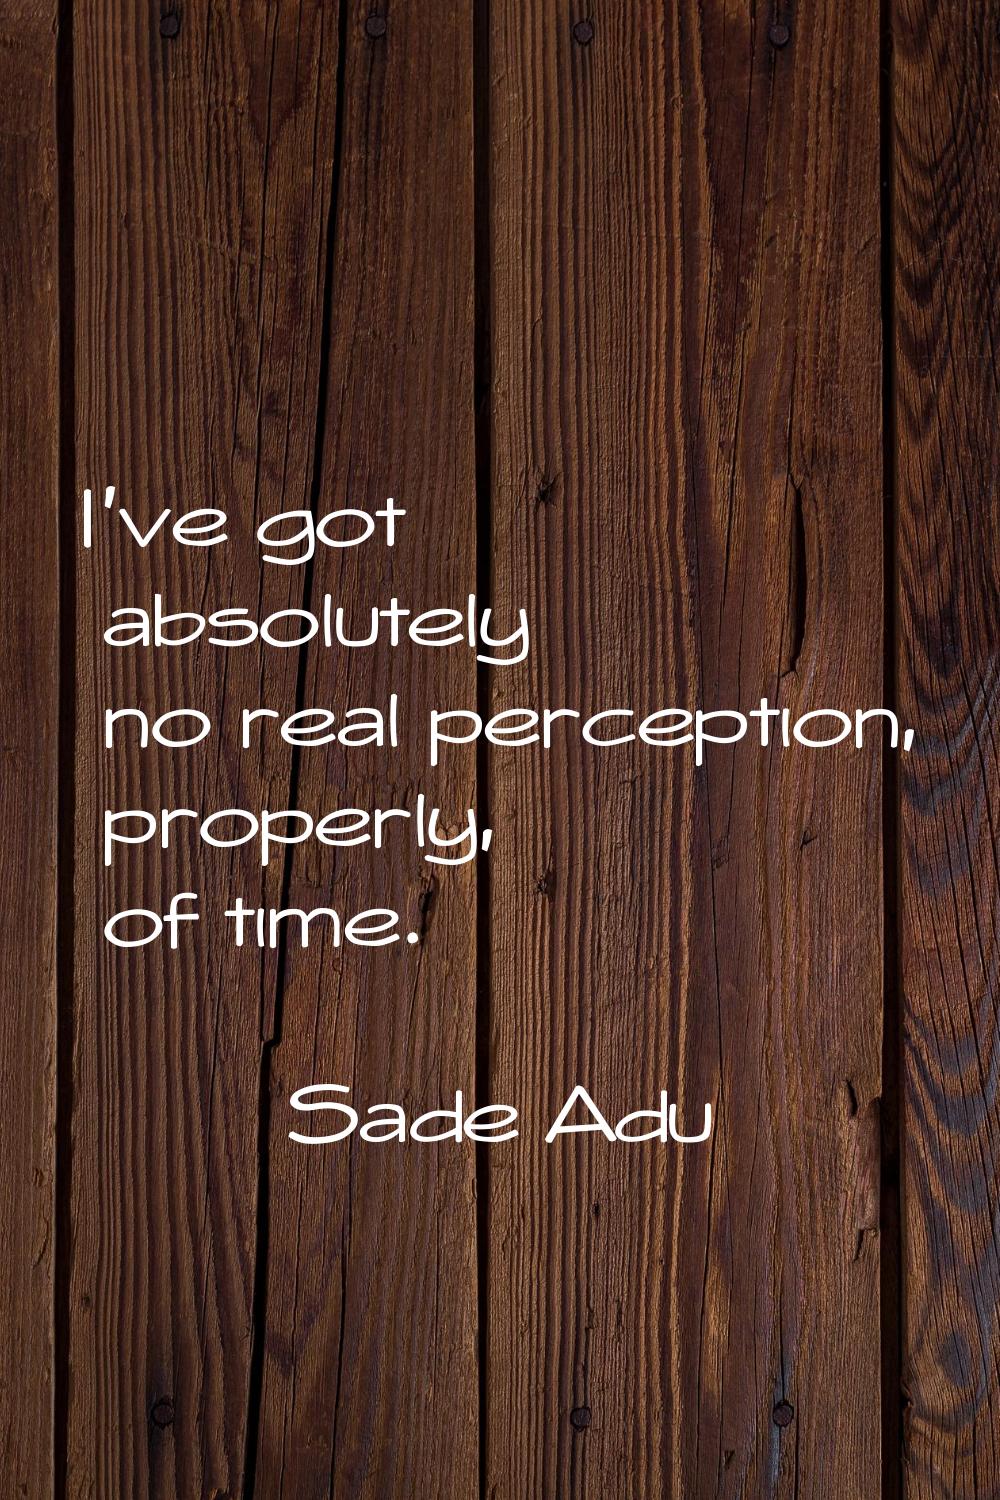 I've got absolutely no real perception, properly, of time.